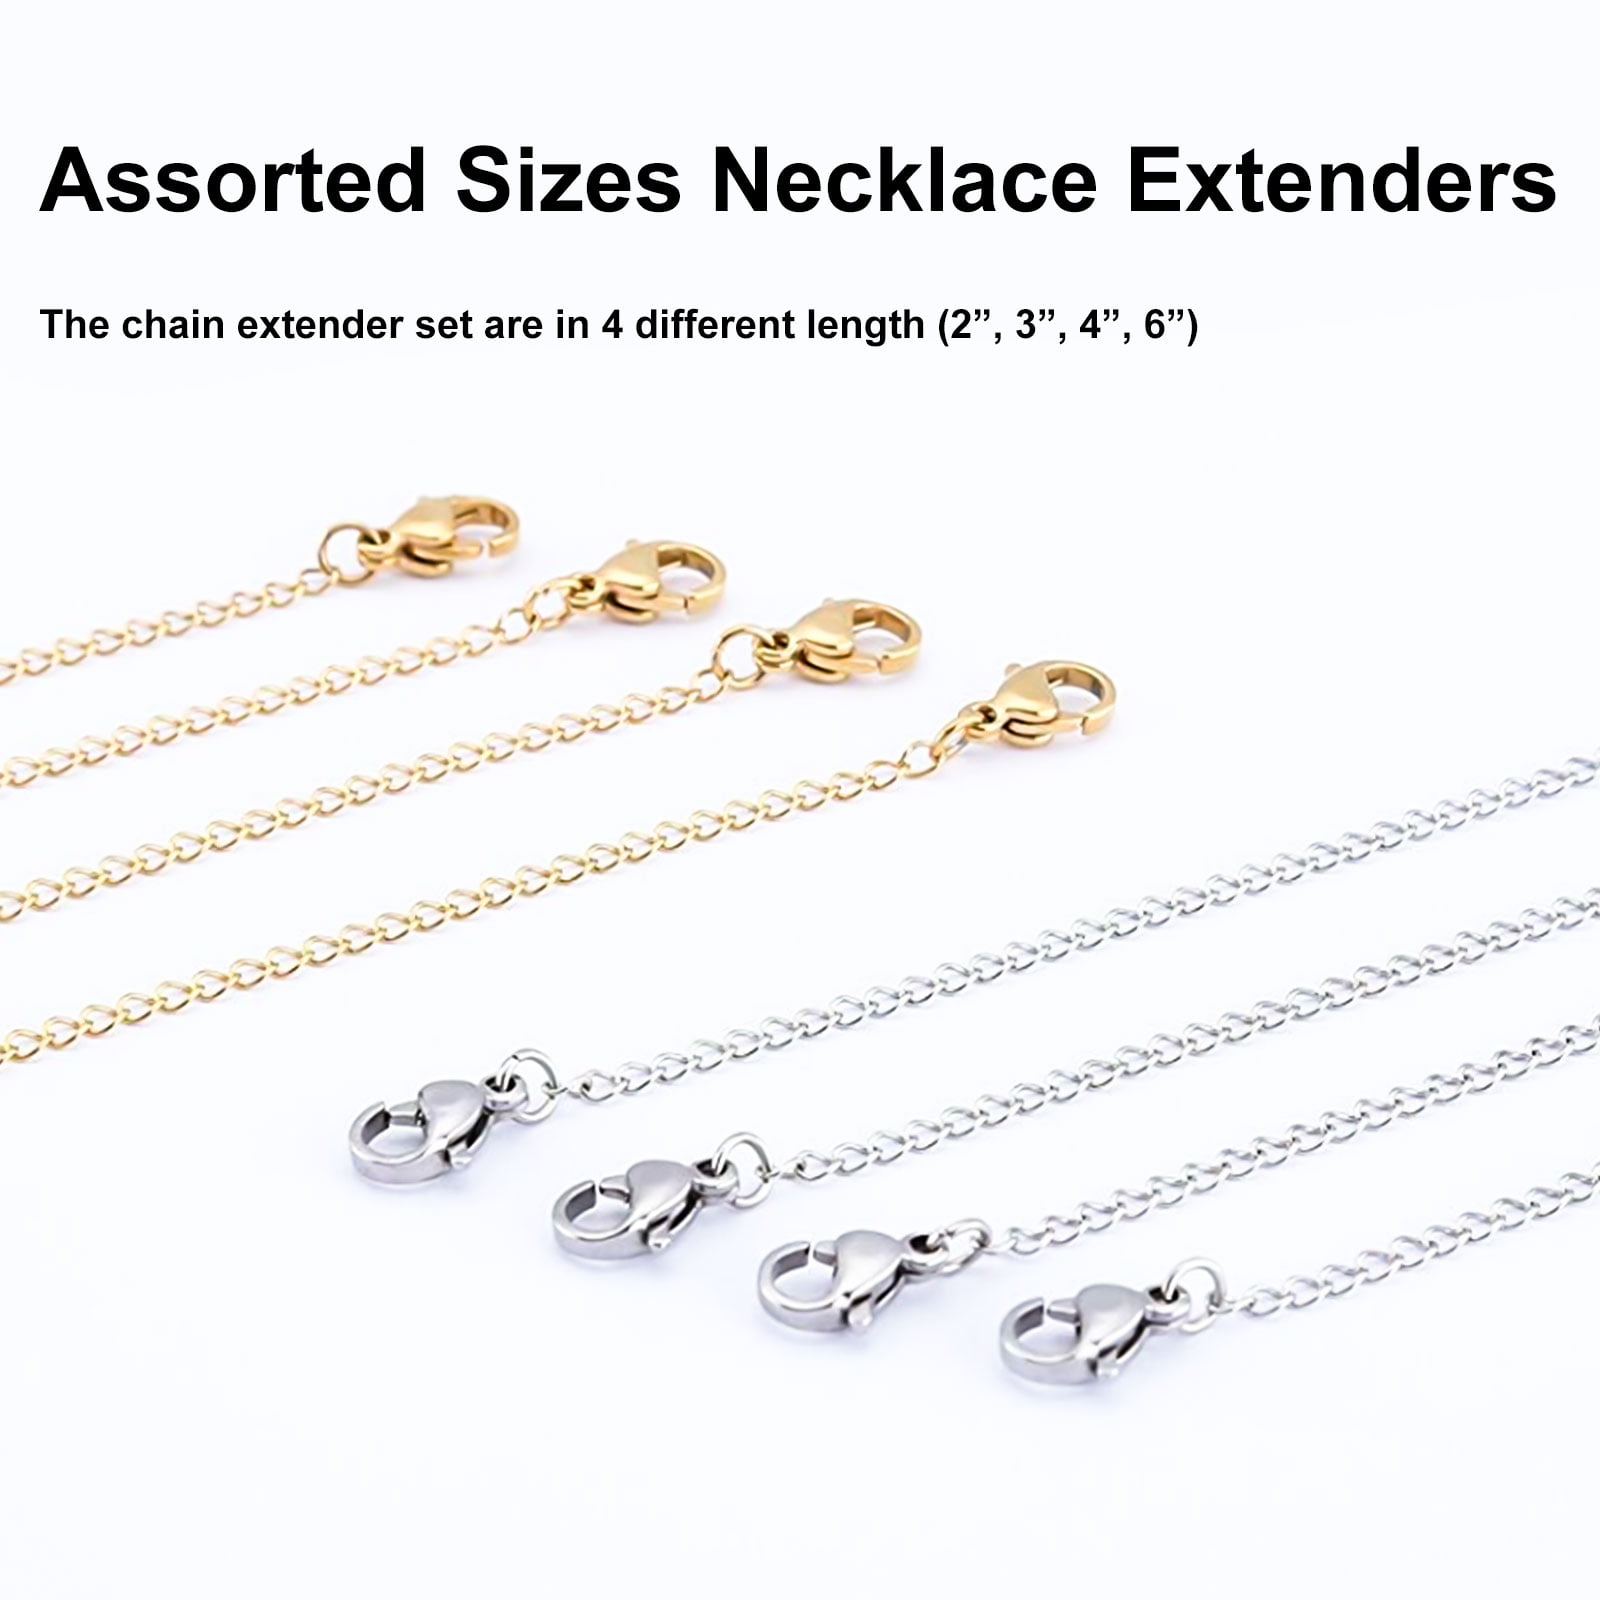 UUBAAR Necklace Extender, 18 Pcs Chain Extenders for Necklaces, Premium Stainless Steel Jewelry Bracelet Anklet Necklace Extenders (6 G, Stainless